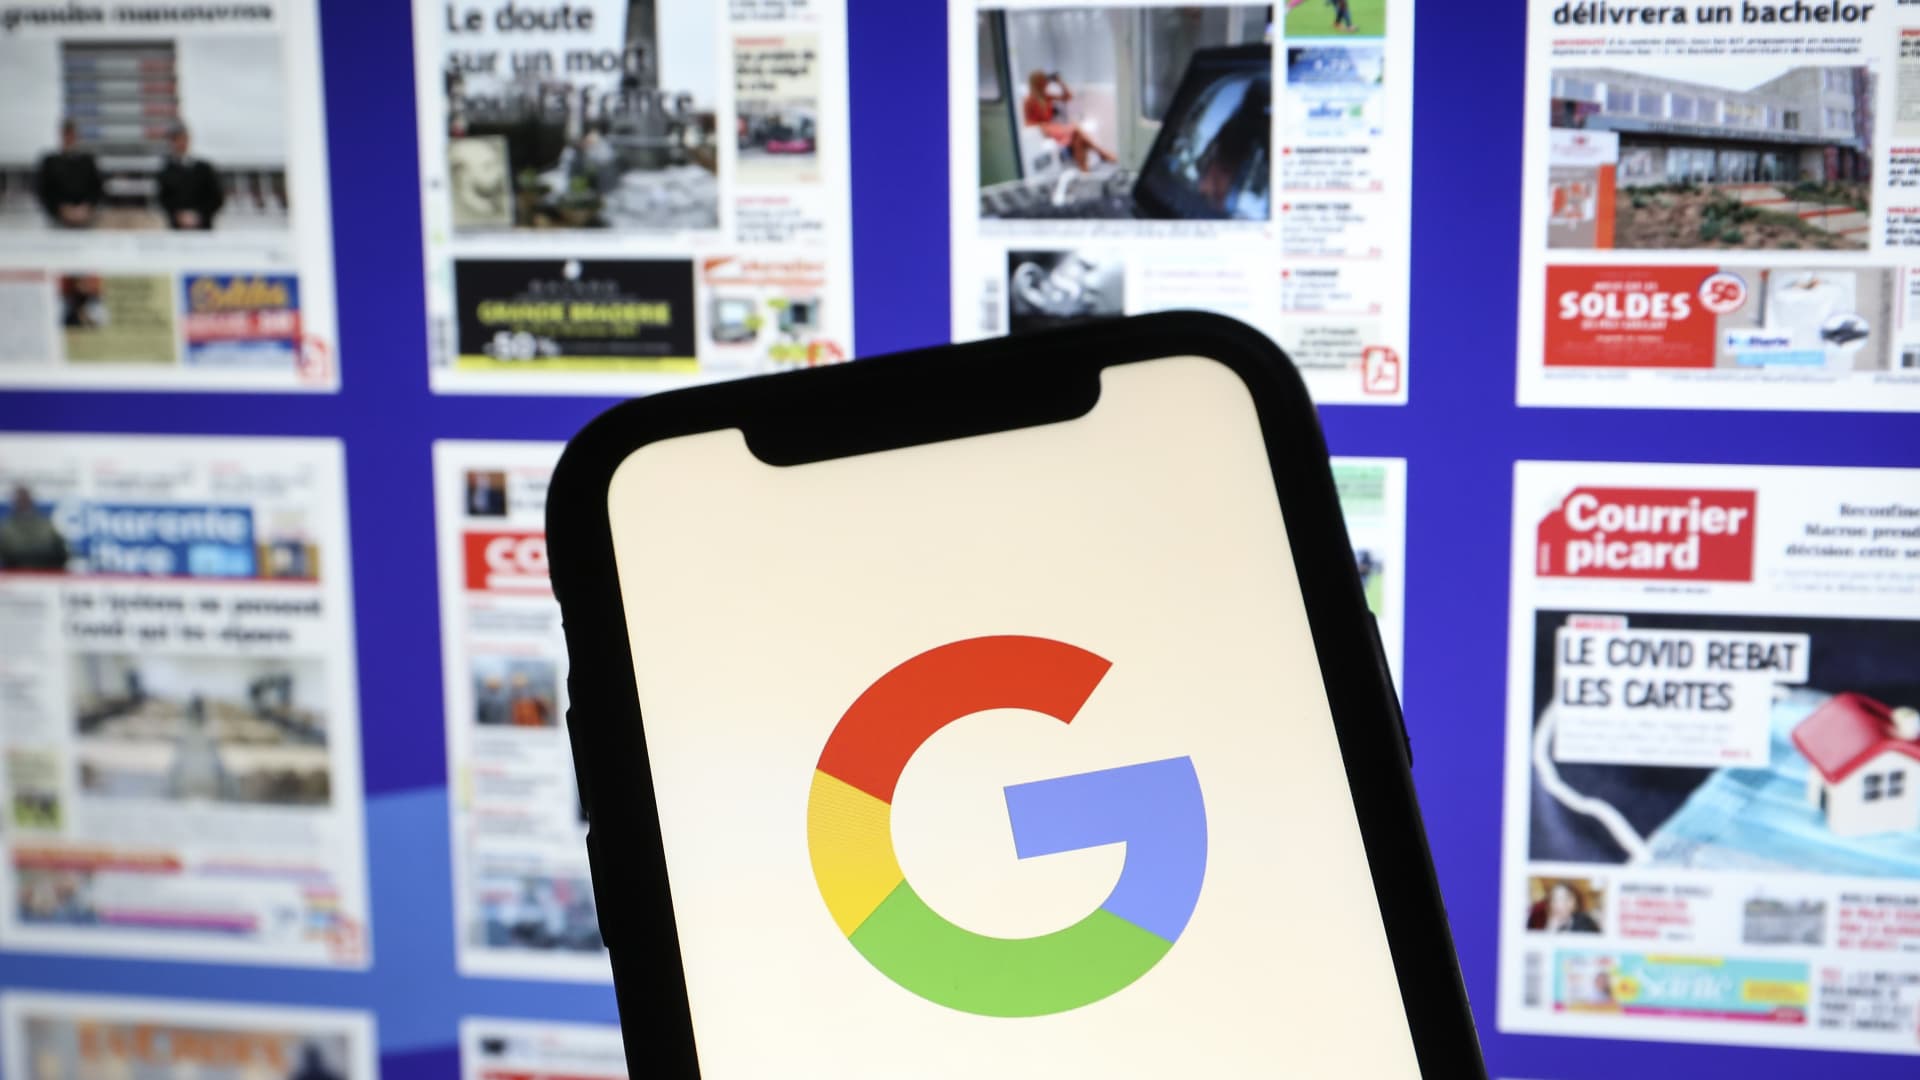 The Google logo displayed on a smartphone with the front pages of several newspapers pictured in the background.